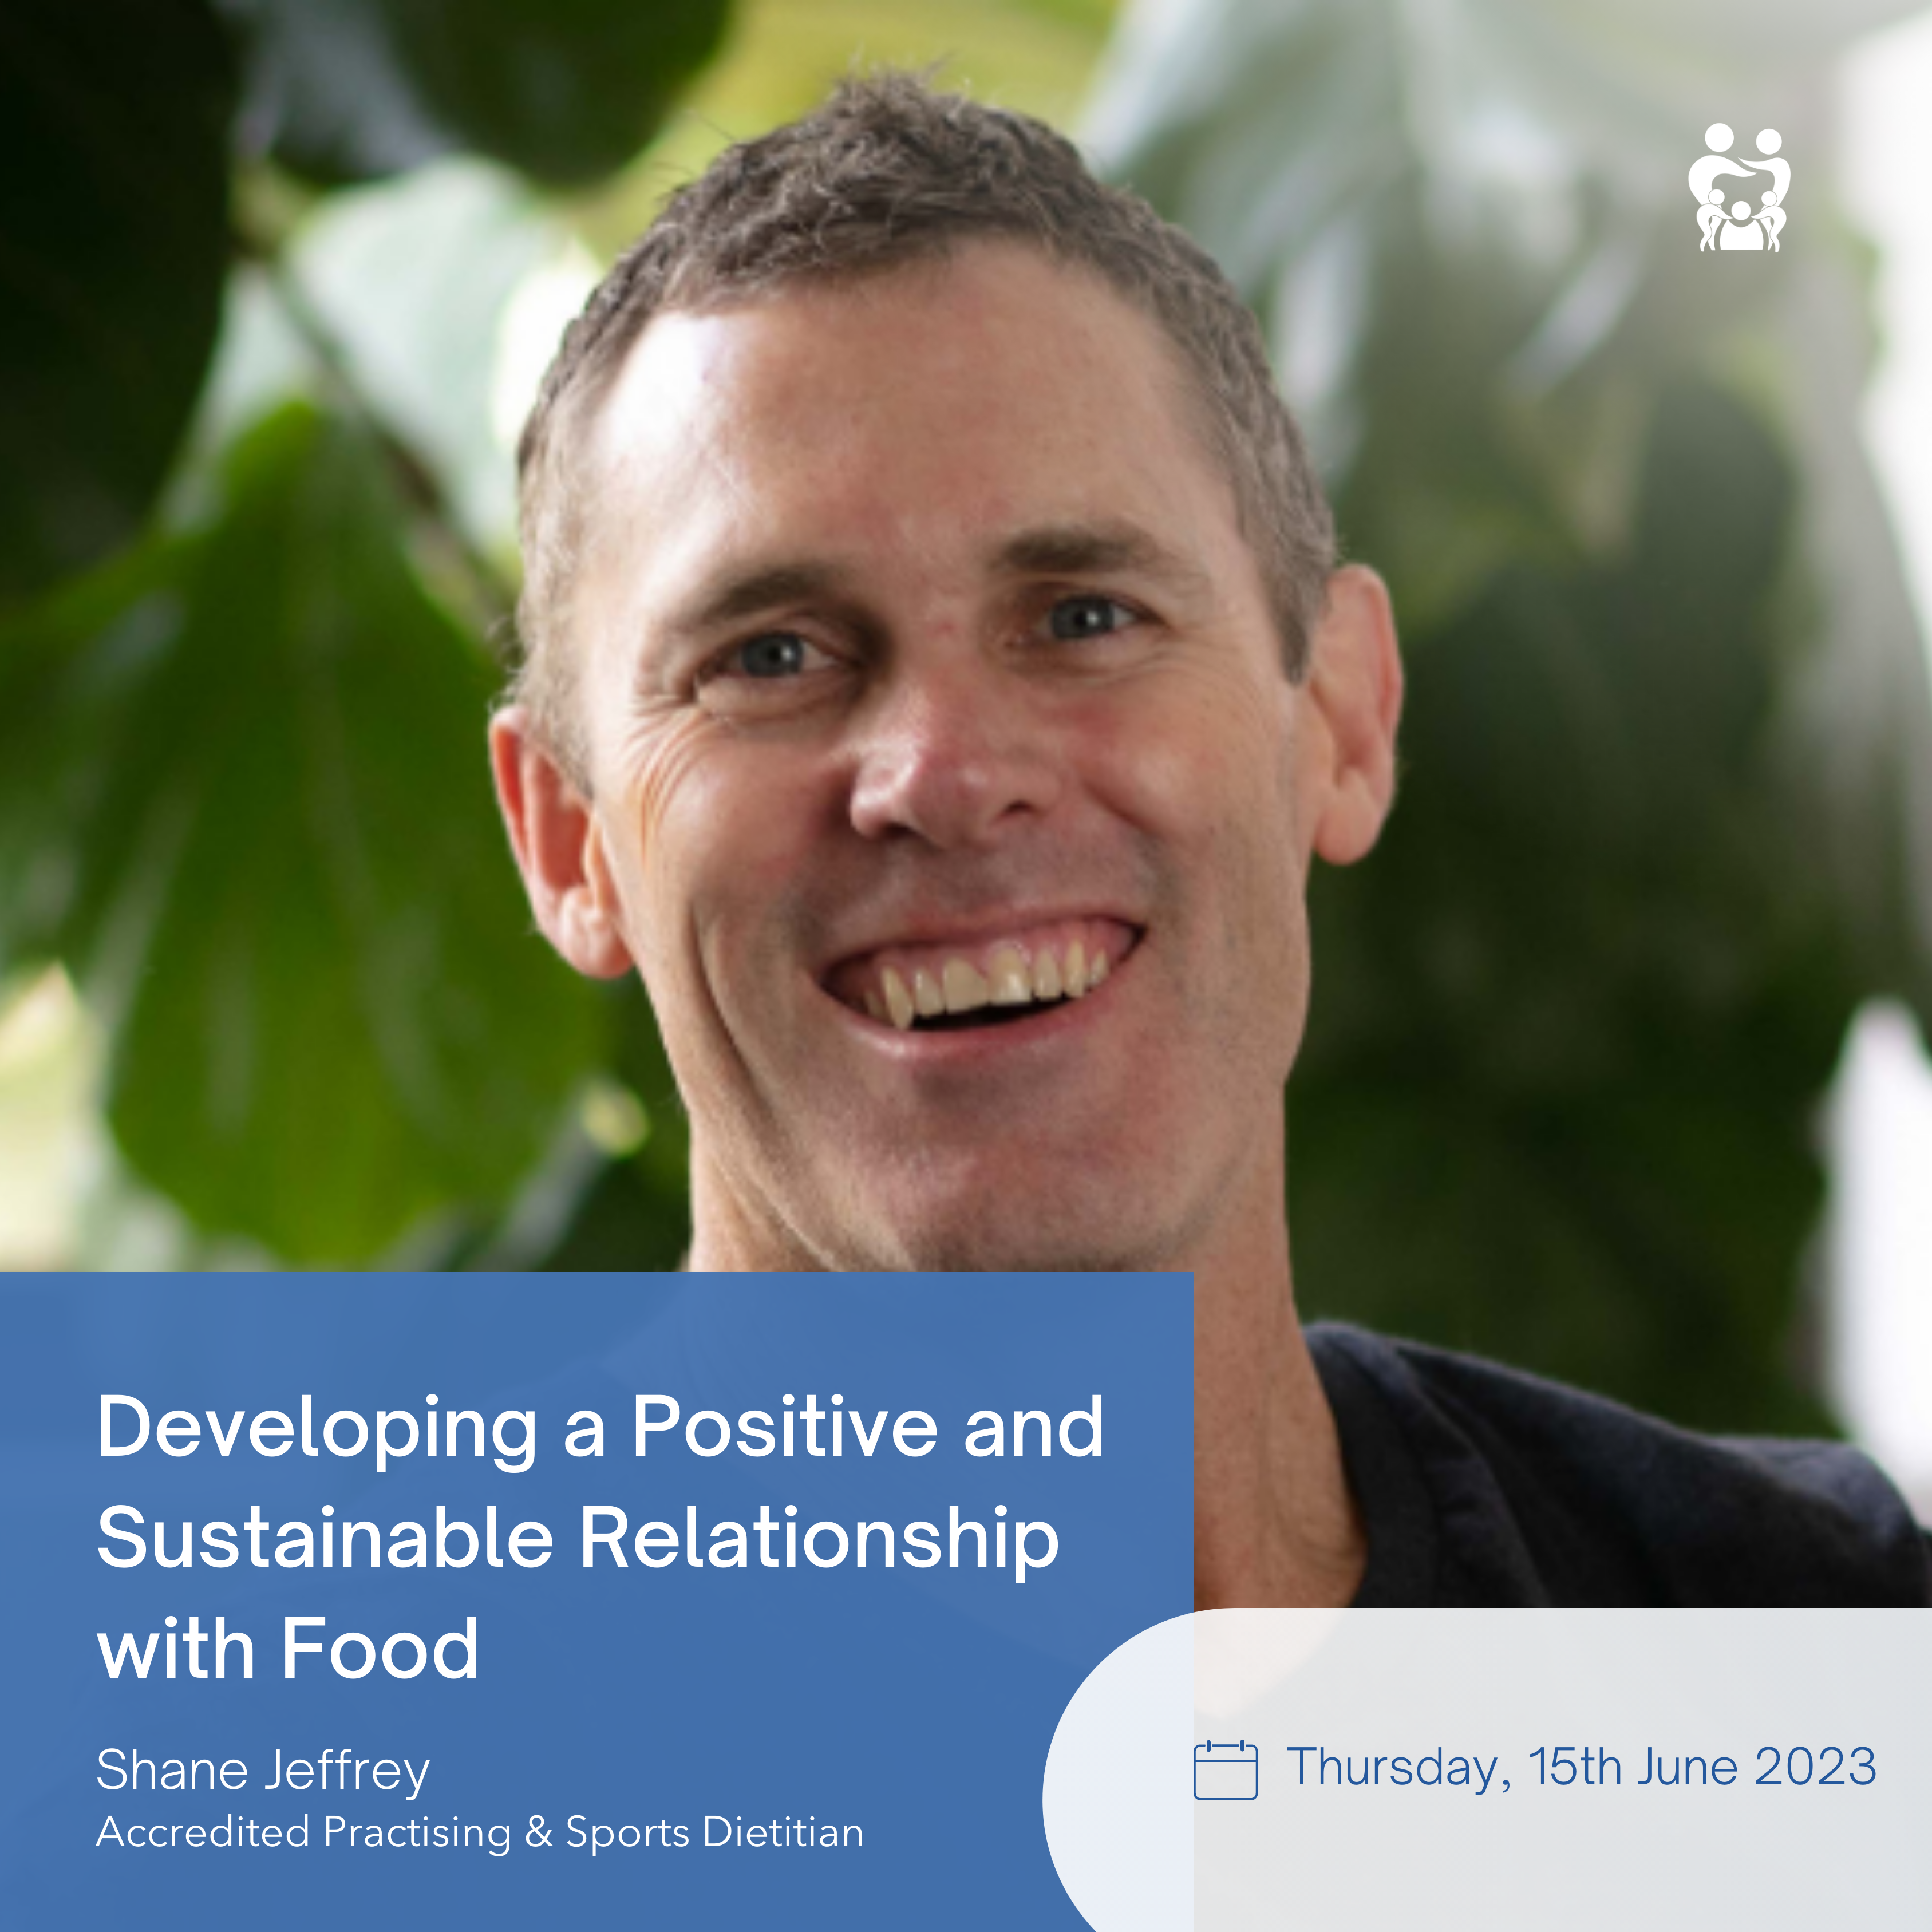 Developing a Positive & Sustainable Relationship with Food - Shane Jeffrey, Accredited Practising & Sports Dietitian 15 May 2023